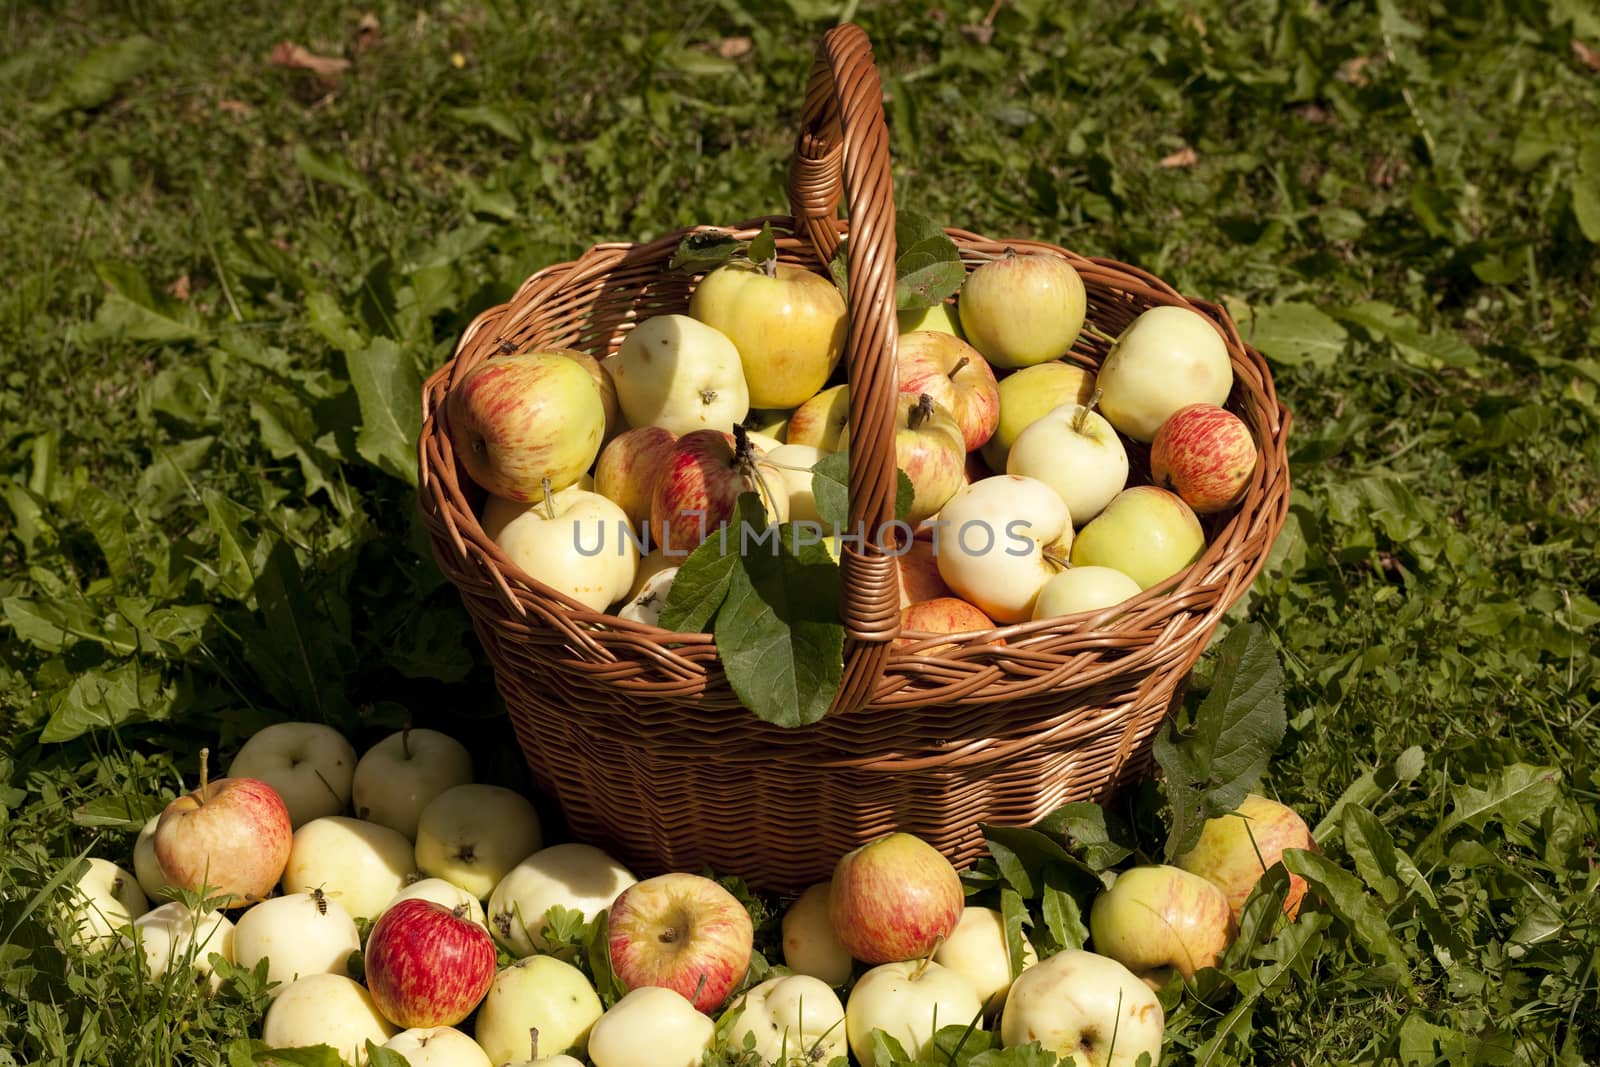 a lot of quantity of apples on grass and in basket